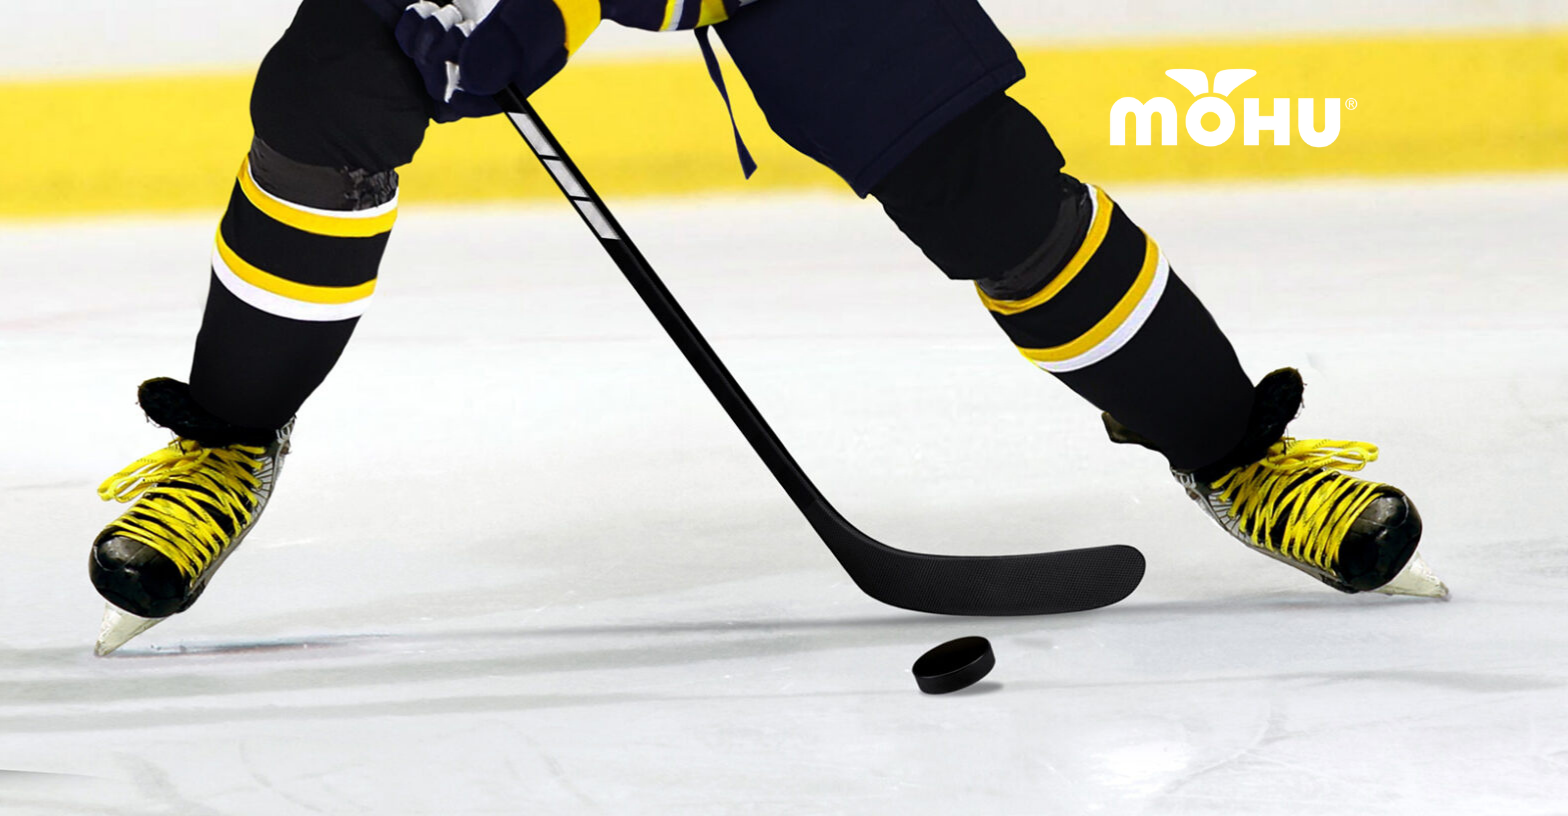 Hockey player on the ice hitting the puck with Mohu logo